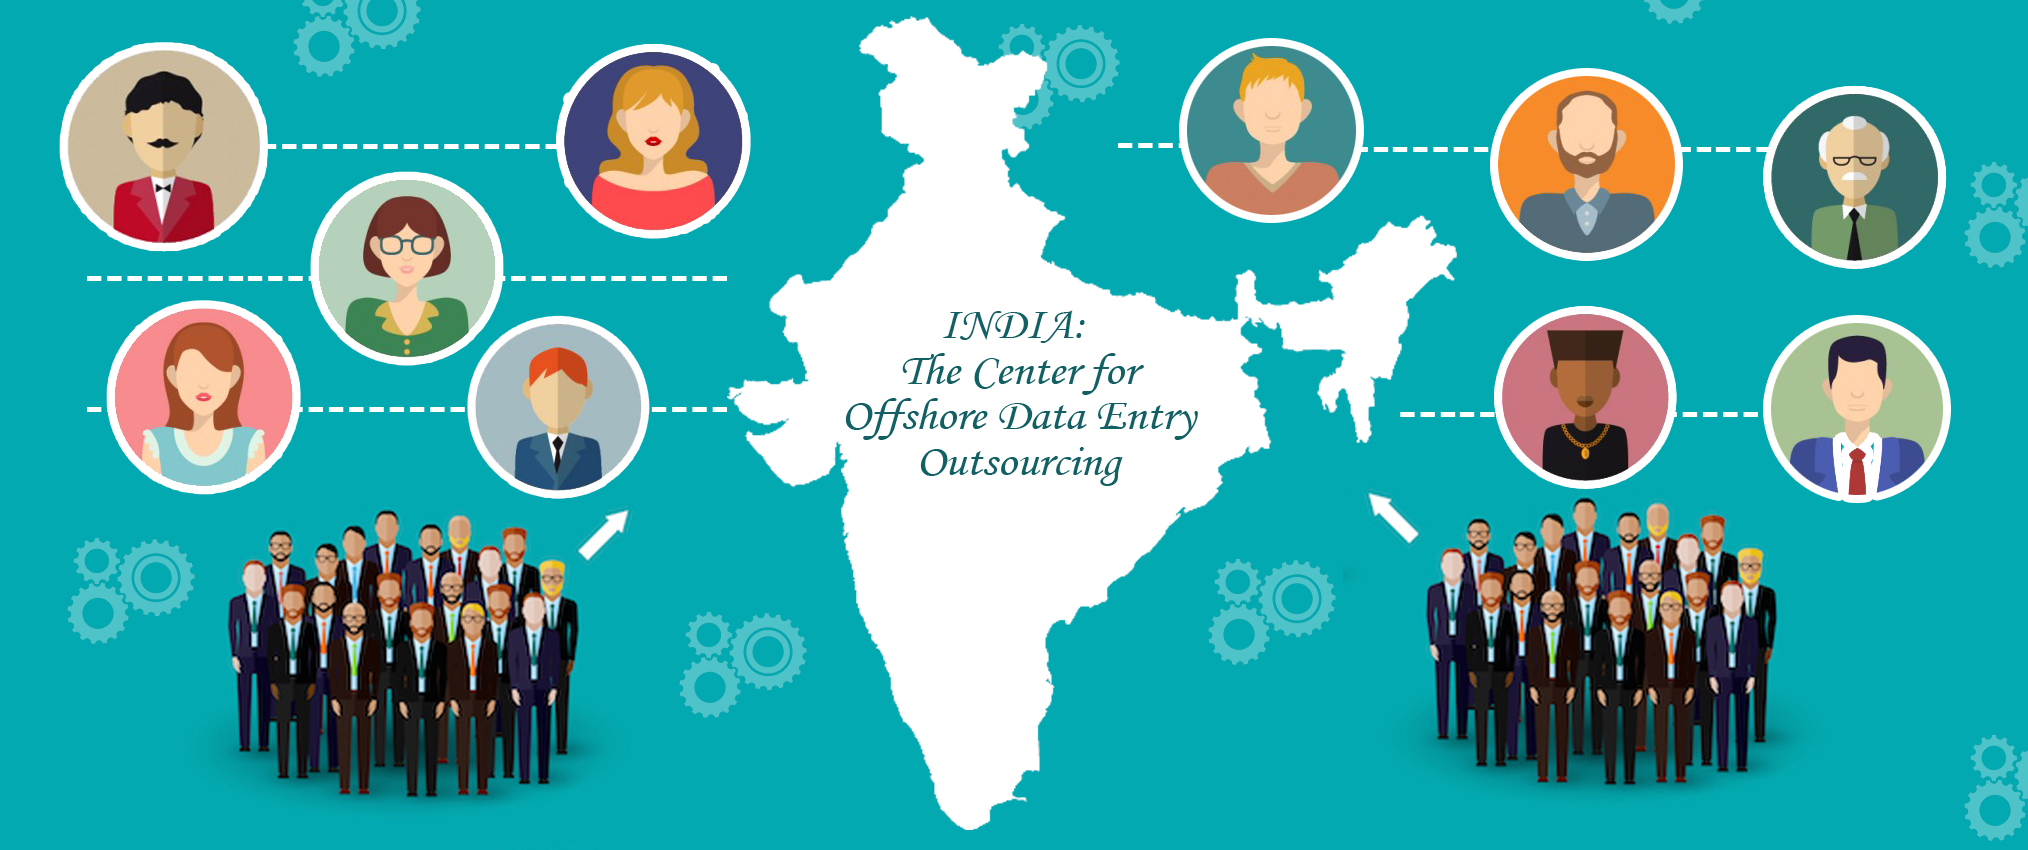 India The Center for Offshore Data Entry Outsourcing